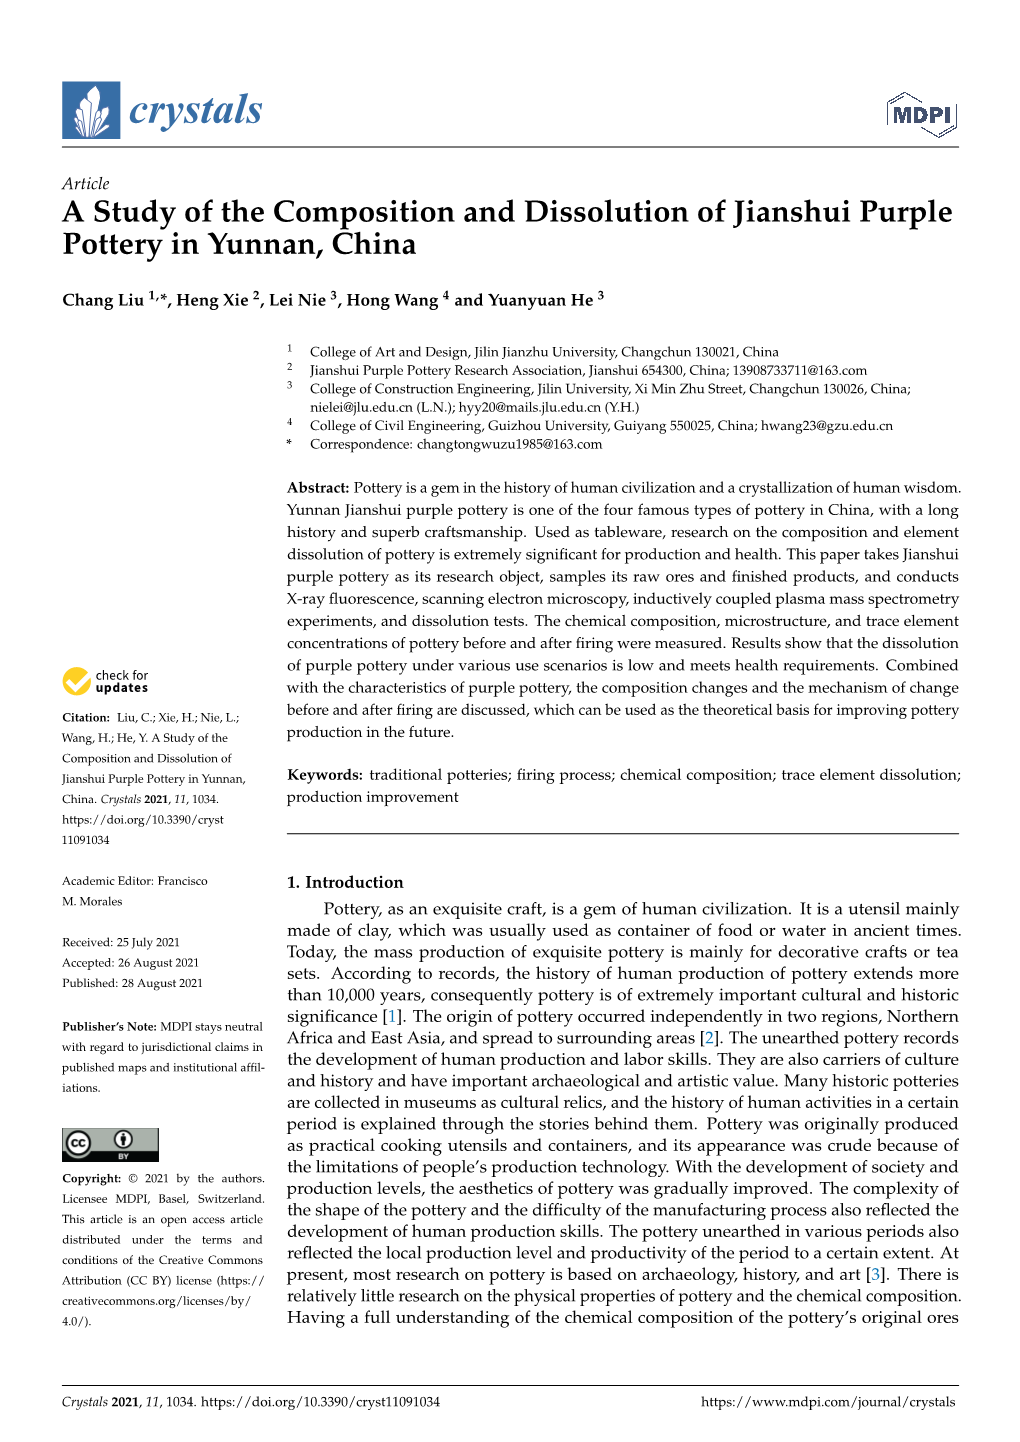 A Study of the Composition and Dissolution of Jianshui Purple Pottery in Yunnan, China